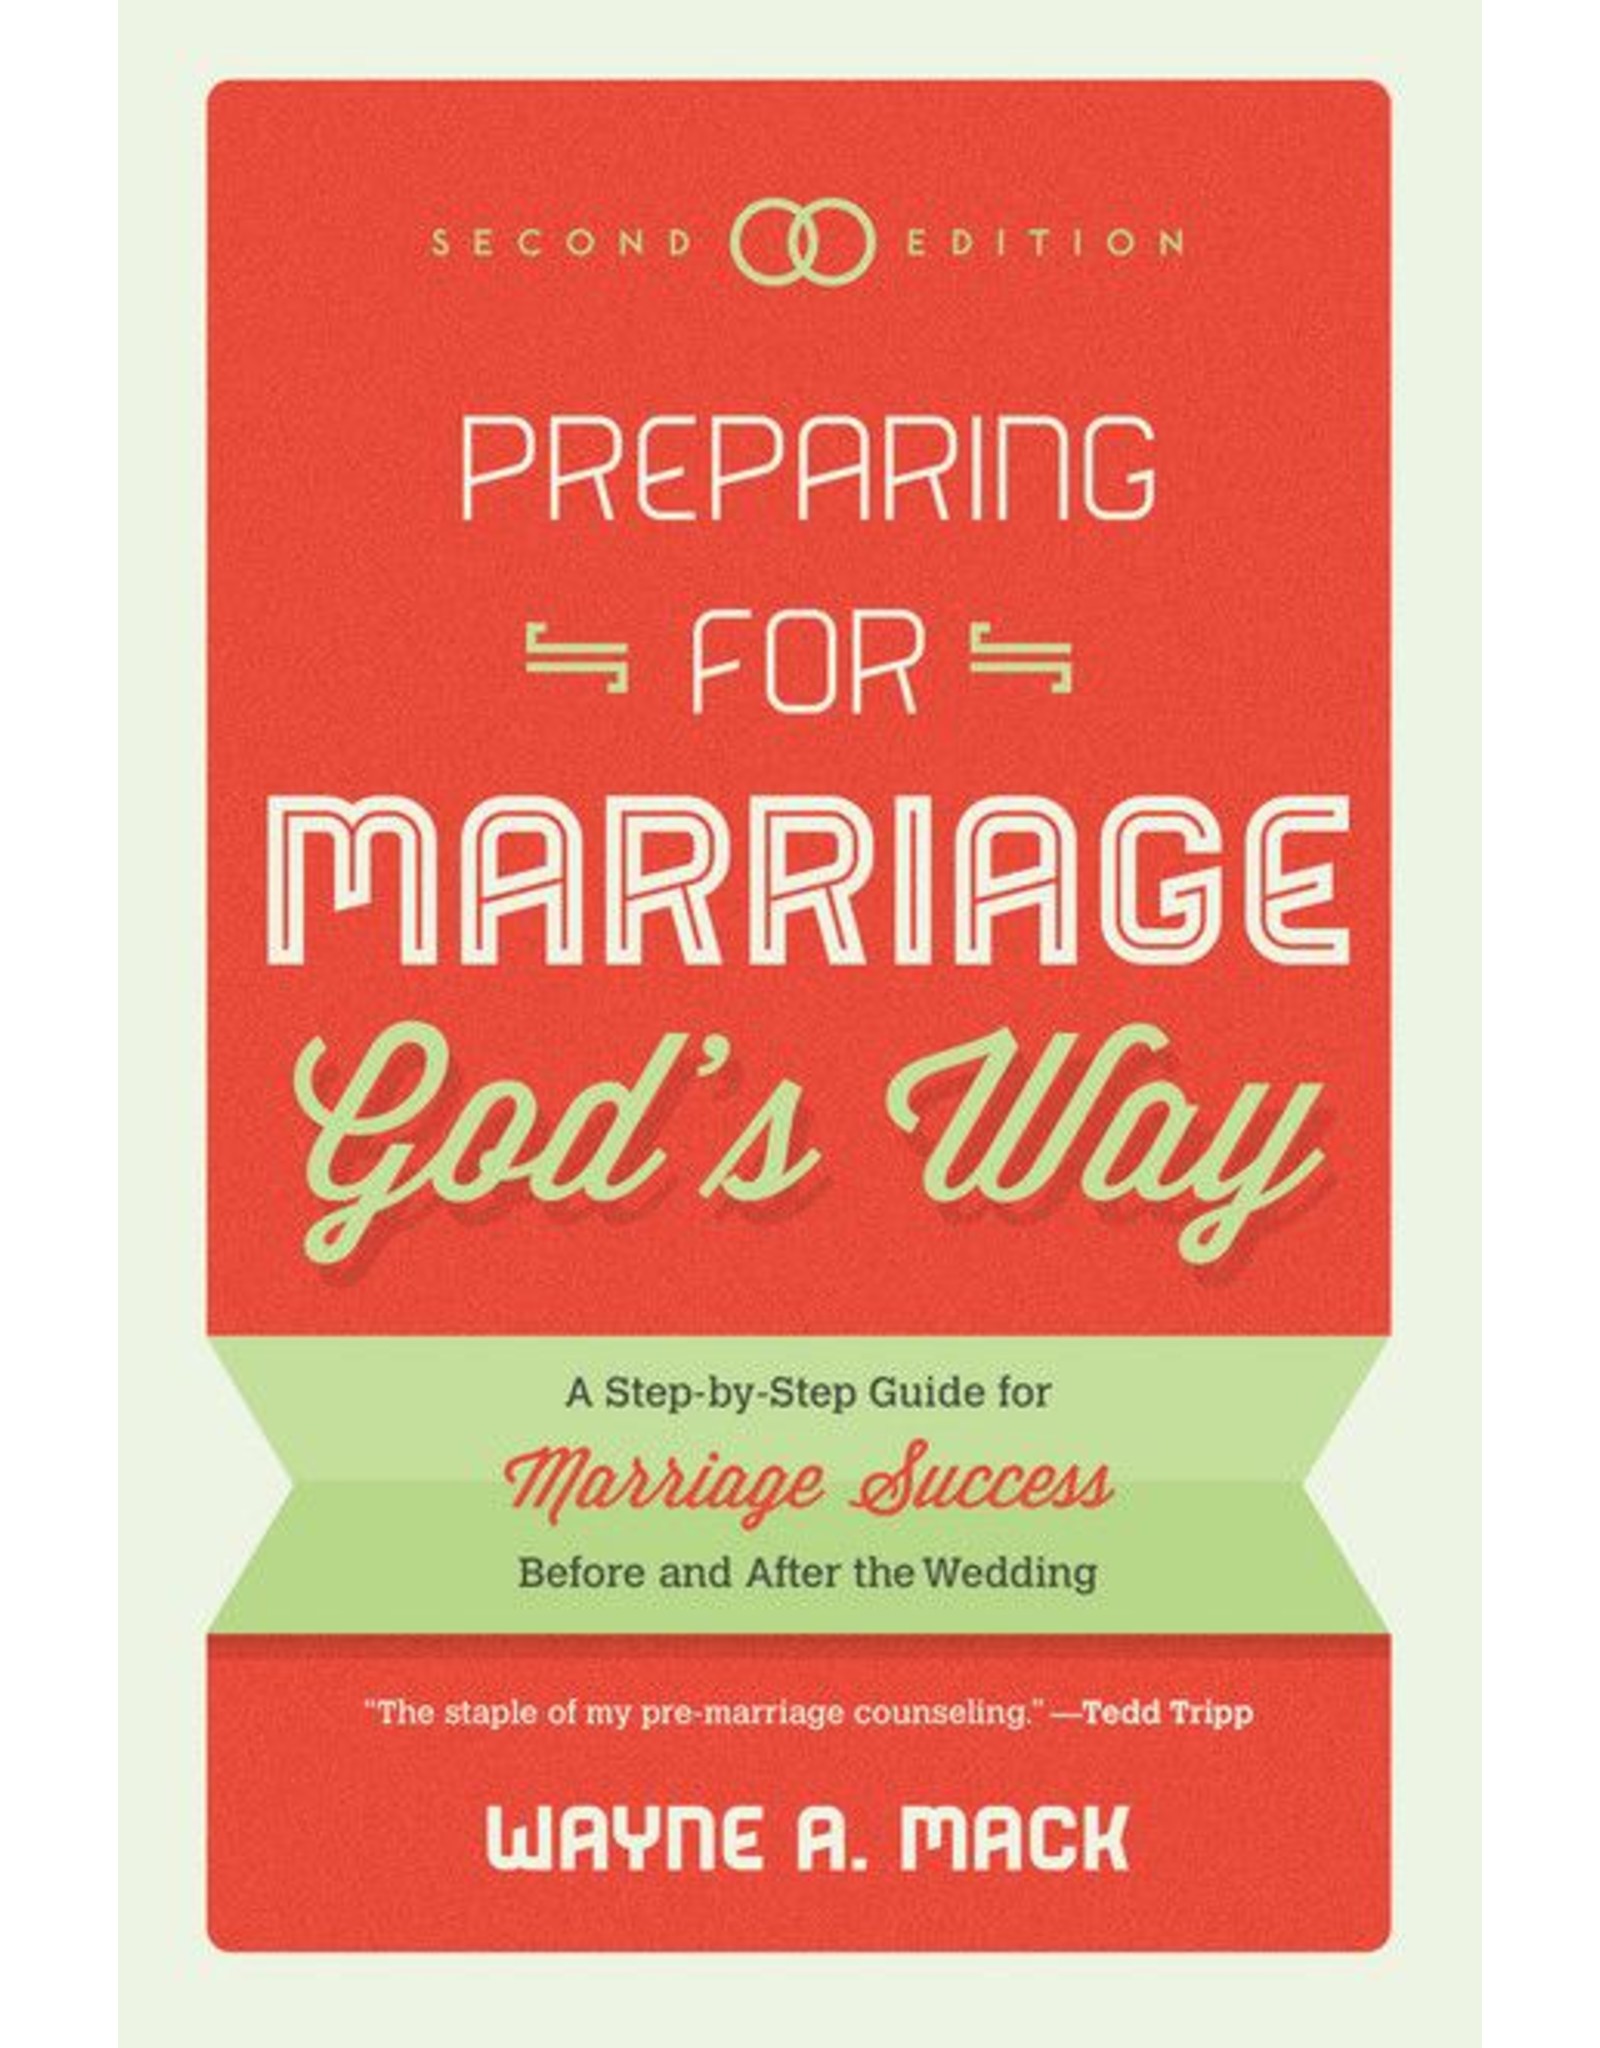 P&R Publishing (Presbyterian and Reformed) Preparing for Marriage God's Way: A Step-by-Step Guide for Marriage Success Before and After the Wedding (2nd ed.)